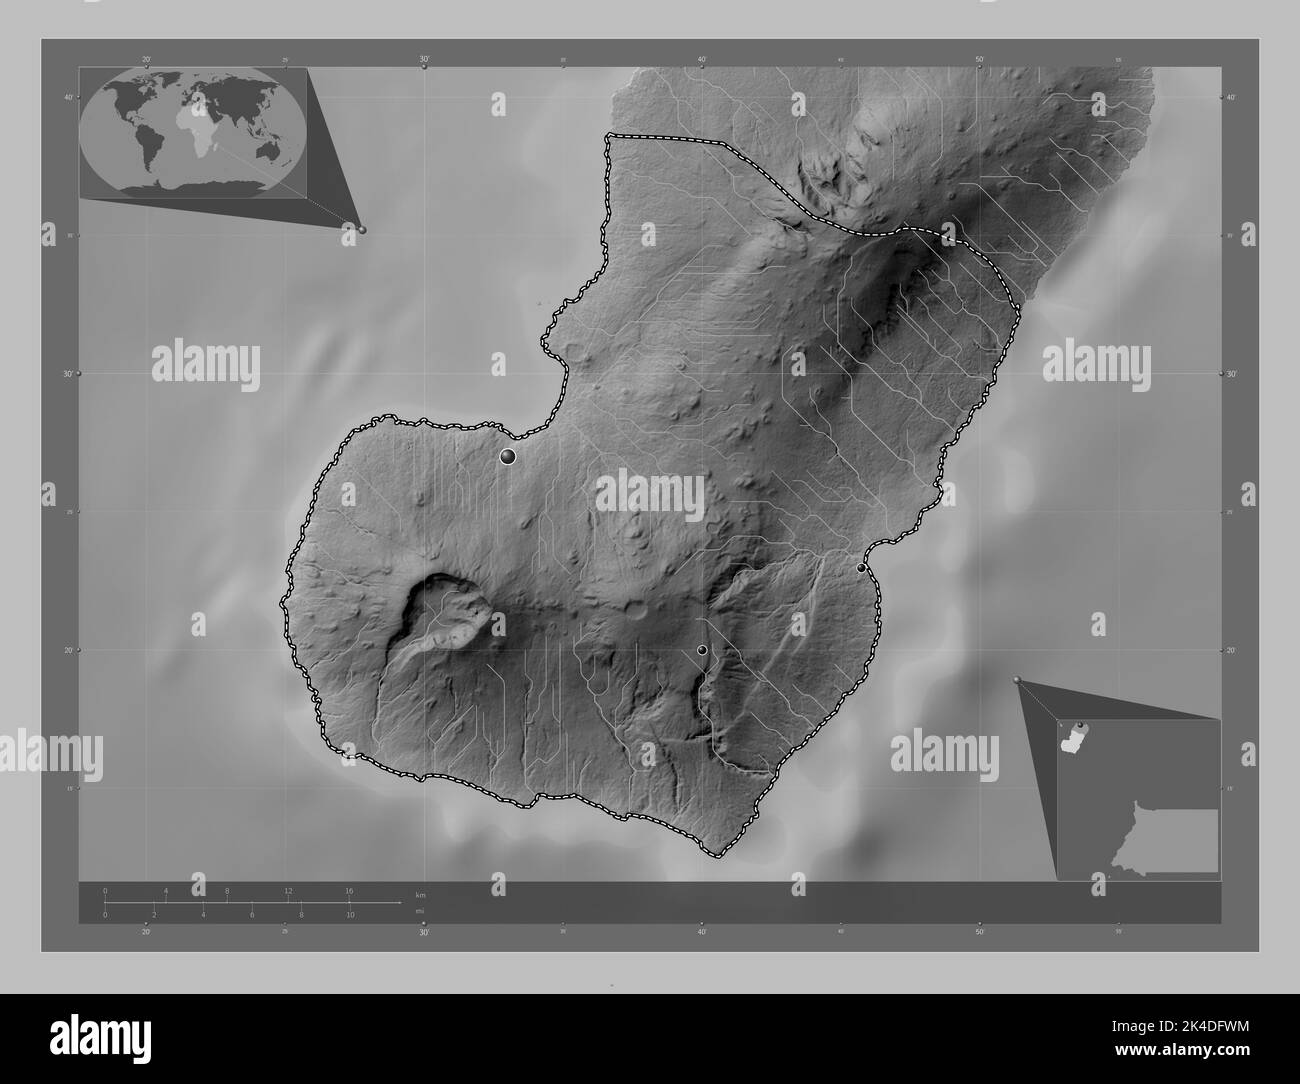 Bioko Sur, province of Equatorial Guinea. Grayscale elevation map with lakes and rivers. Locations of major cities of the region. Corner auxiliary loc Stock Photo